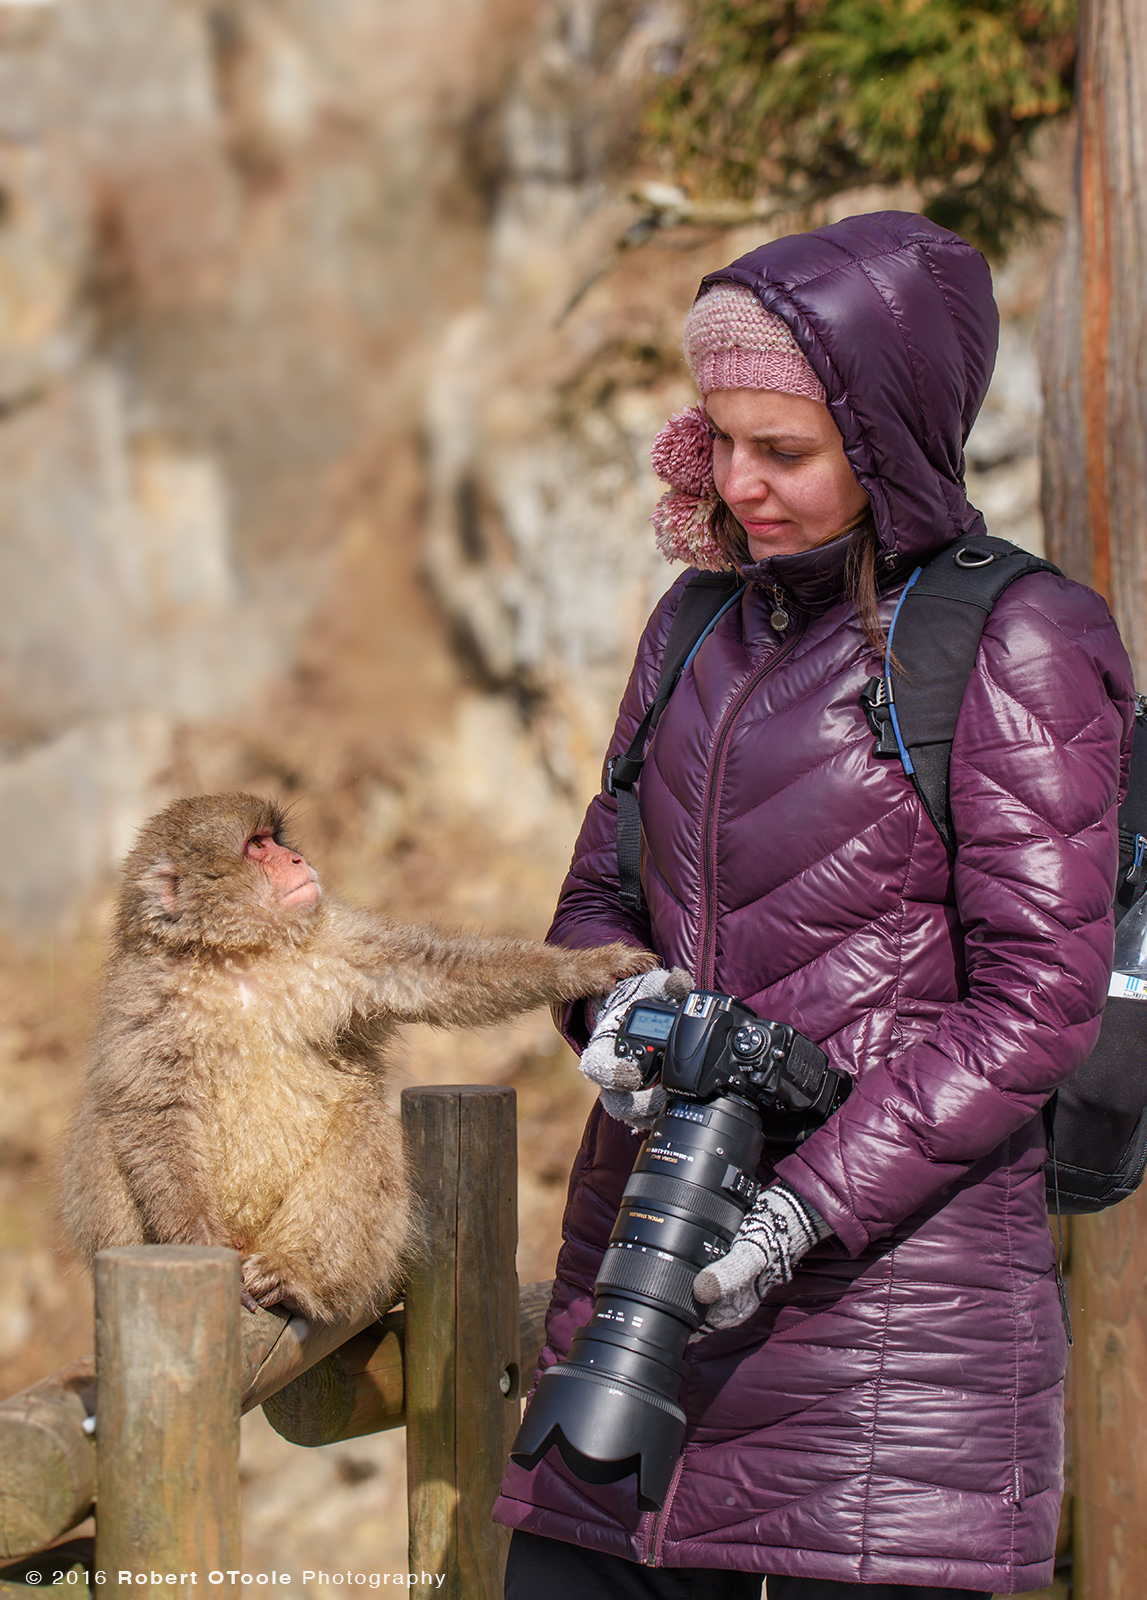 Snow Monkey Baby Making Contact with Photographer